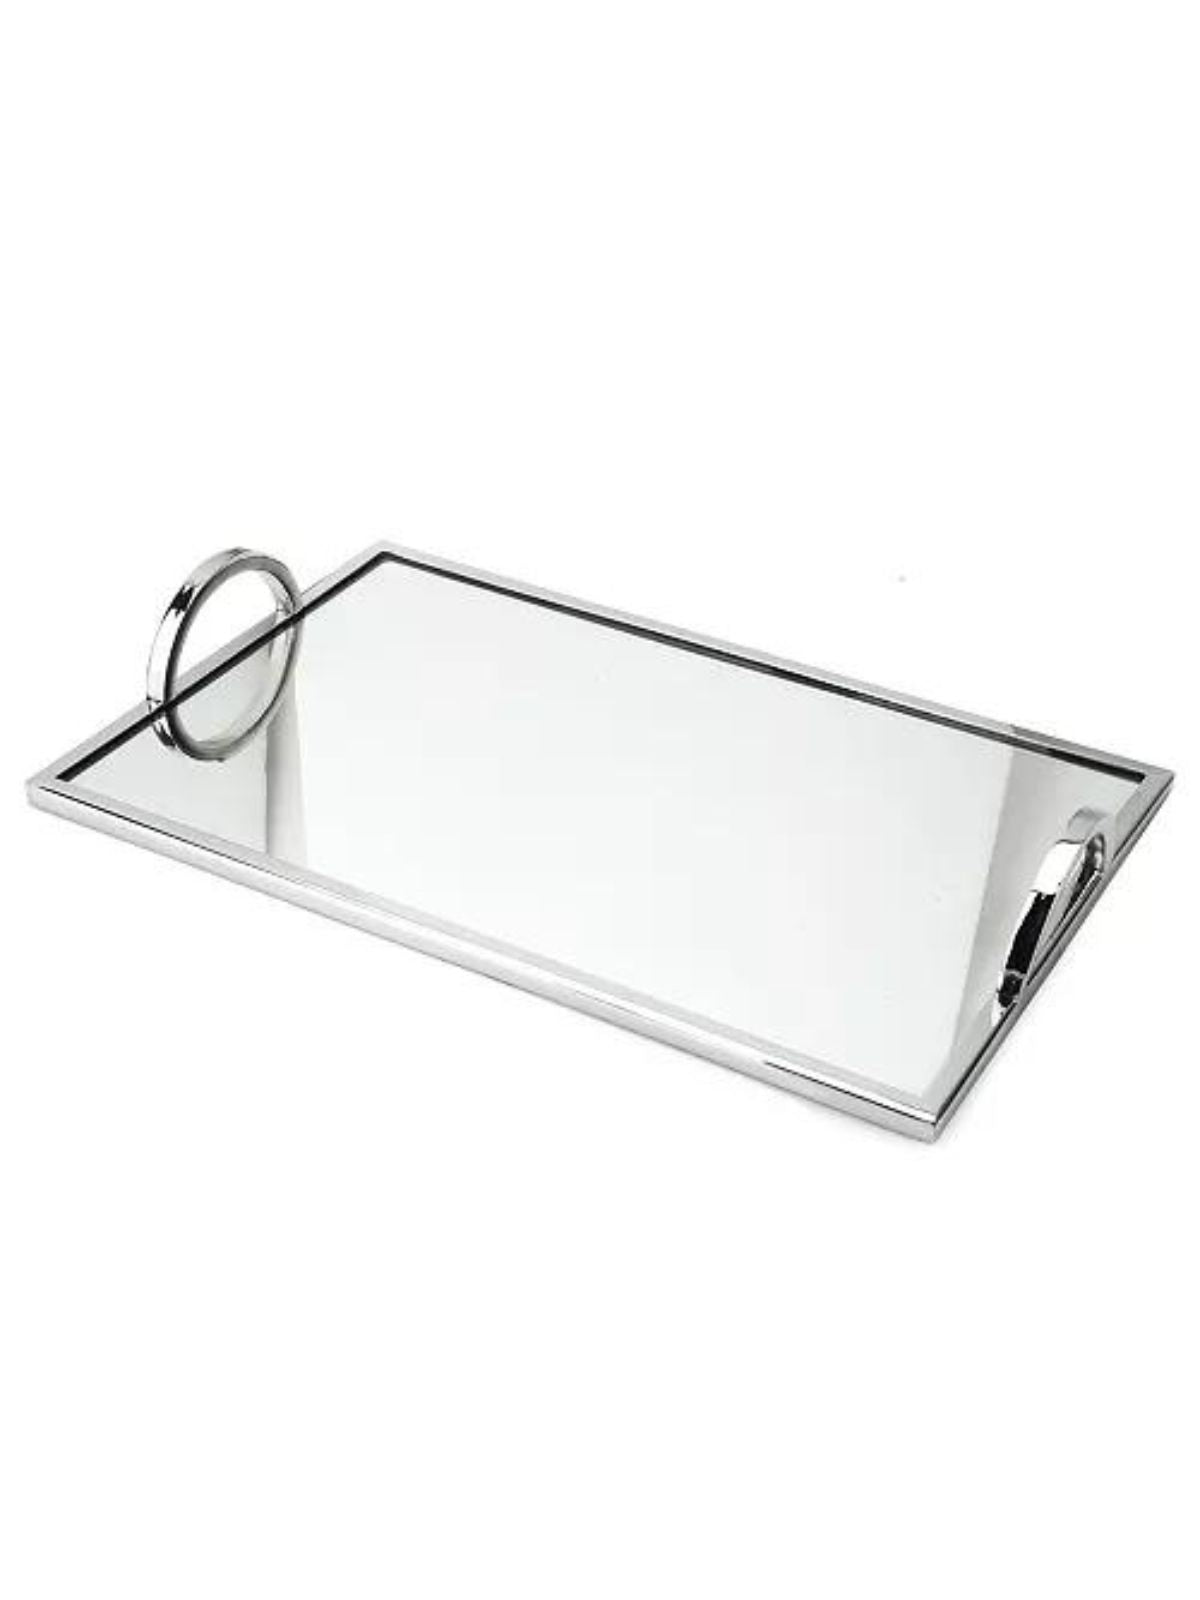 Large Rectangular Mirror Tray with Silver Handles